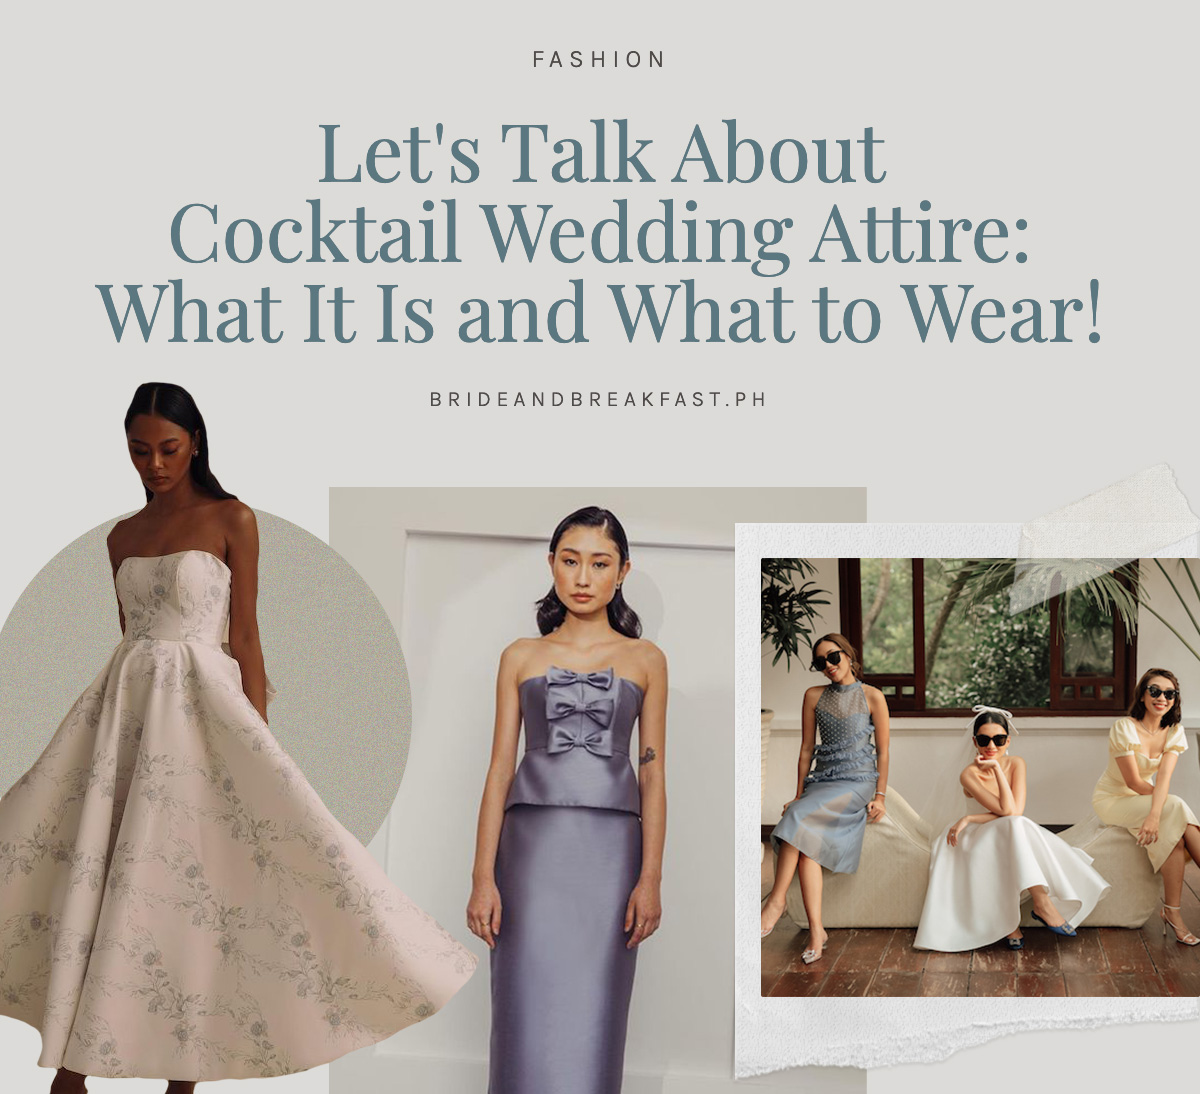 Let's Talk About Cocktail Wedding Attire: What It Is and What to Wear!